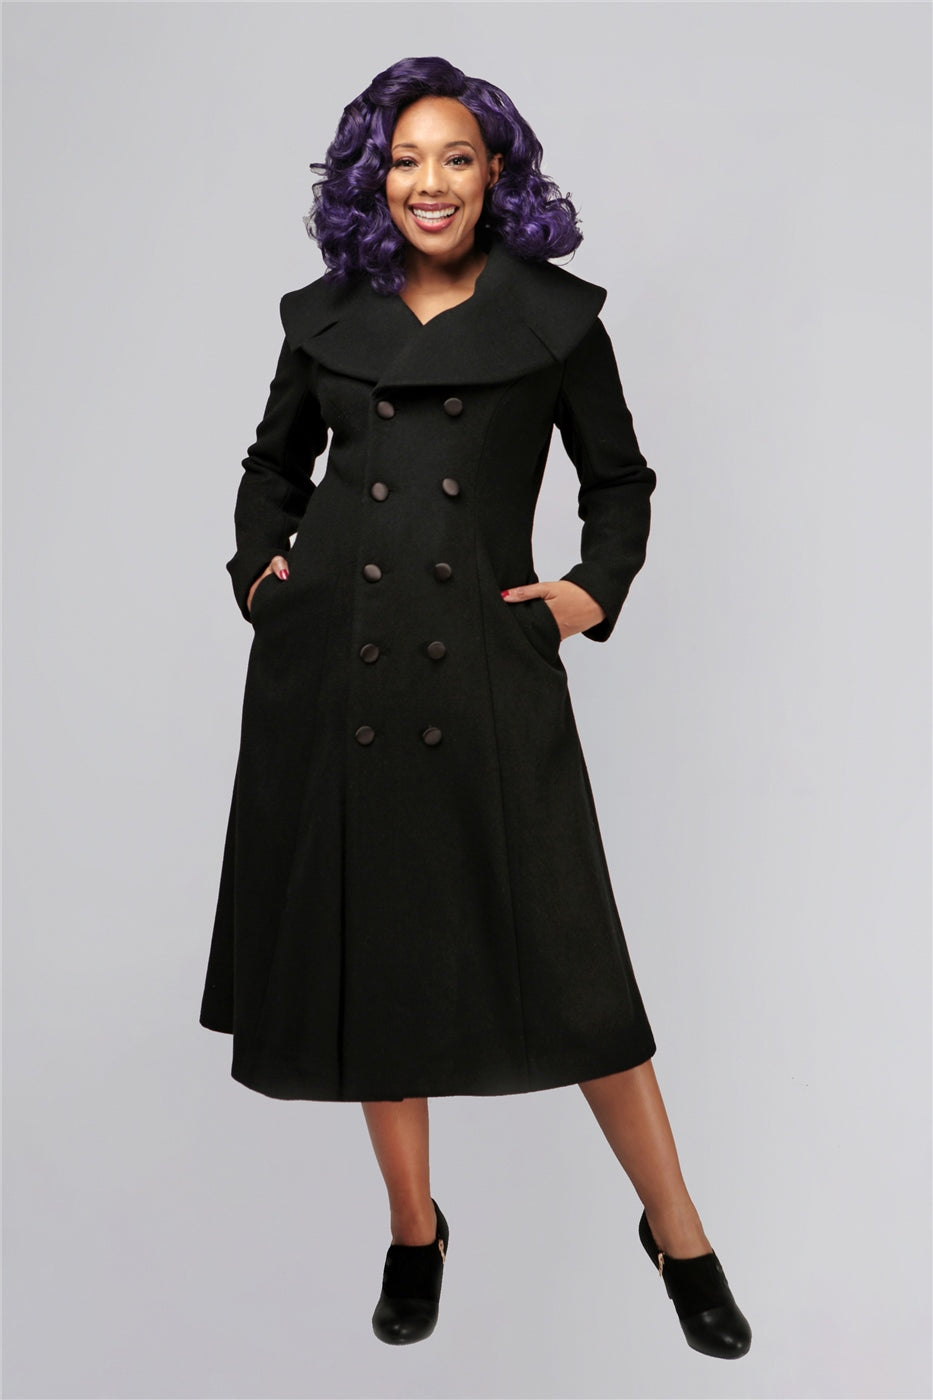 smiling model with curly purple hair standing with her hands in her coat pockets 